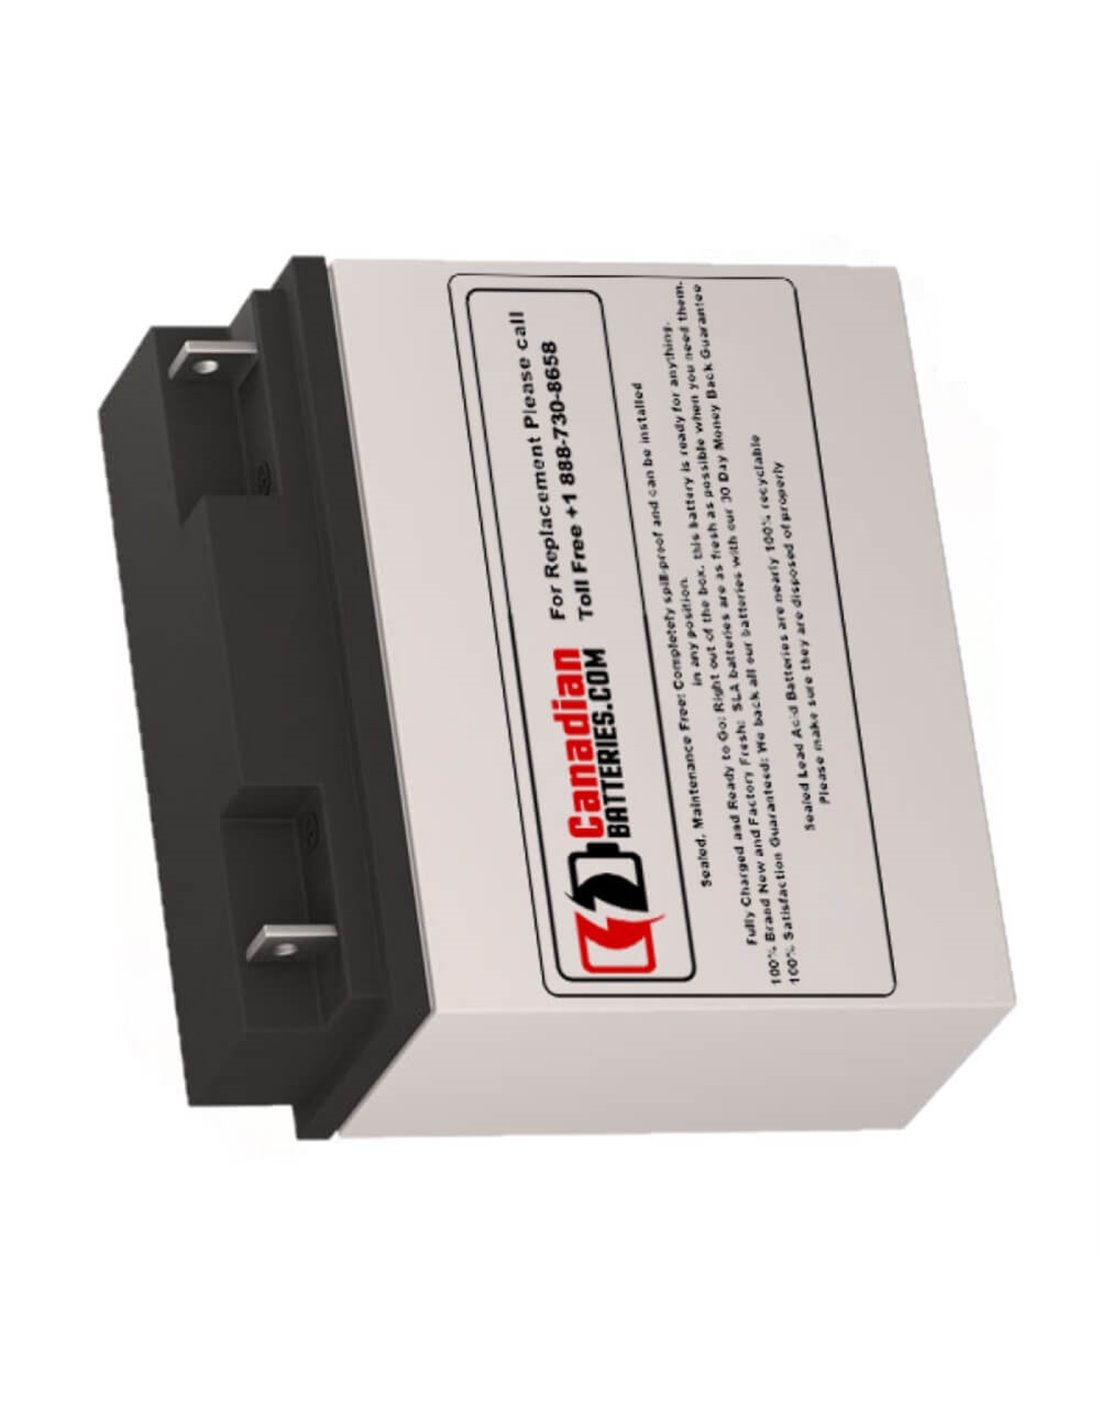 Battery for Sola Booster Pac UPS, 1 x 12V, 18ah - 216Wh